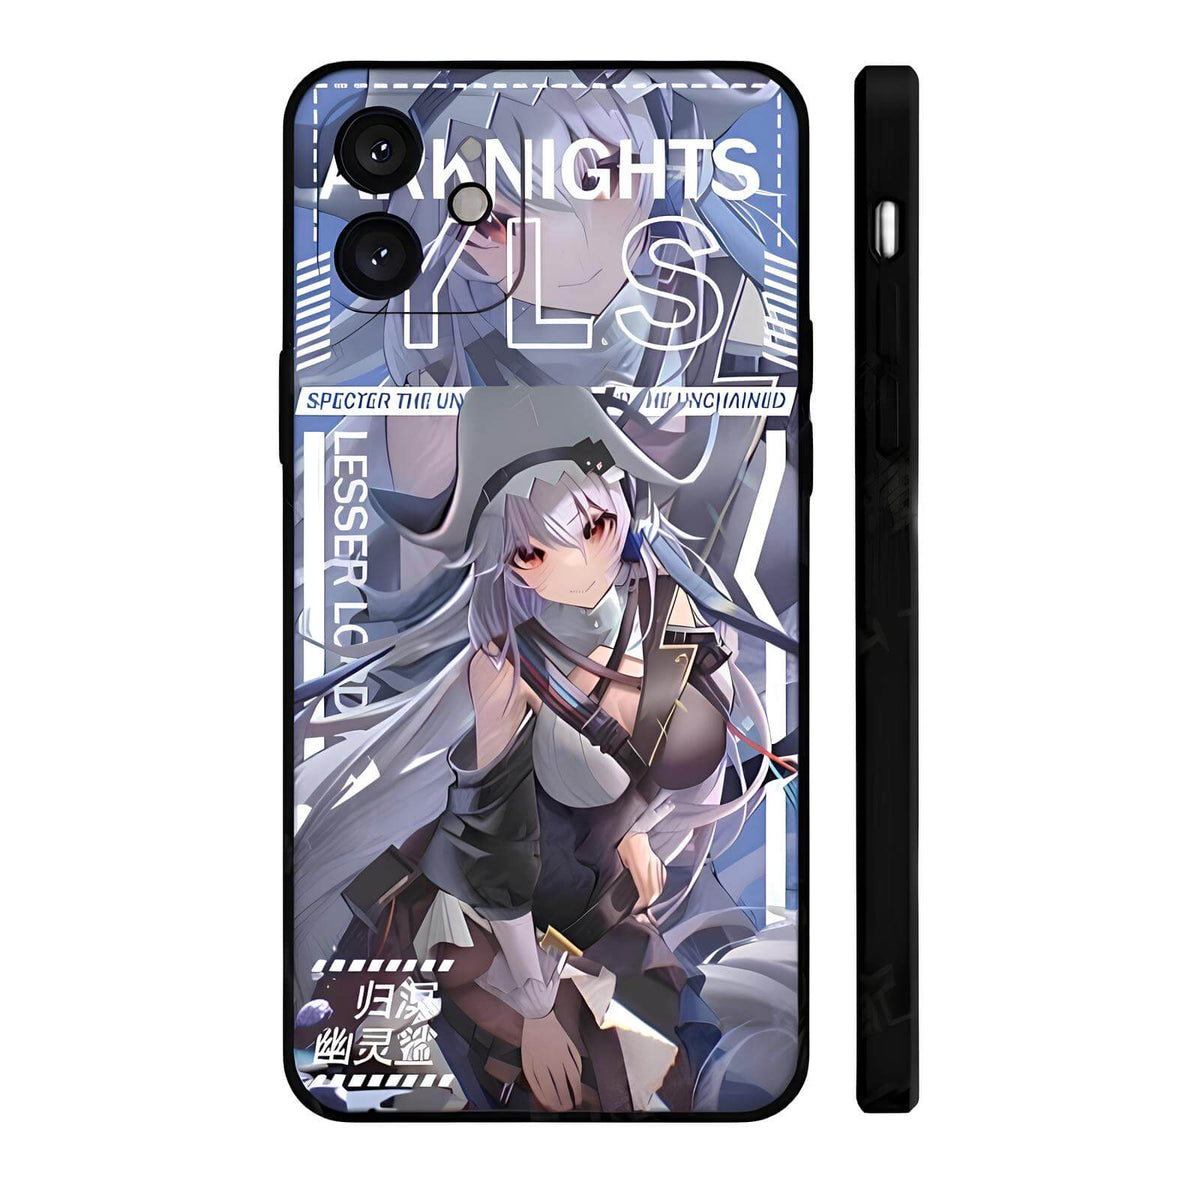 Specter the Unchained Style3 phone case